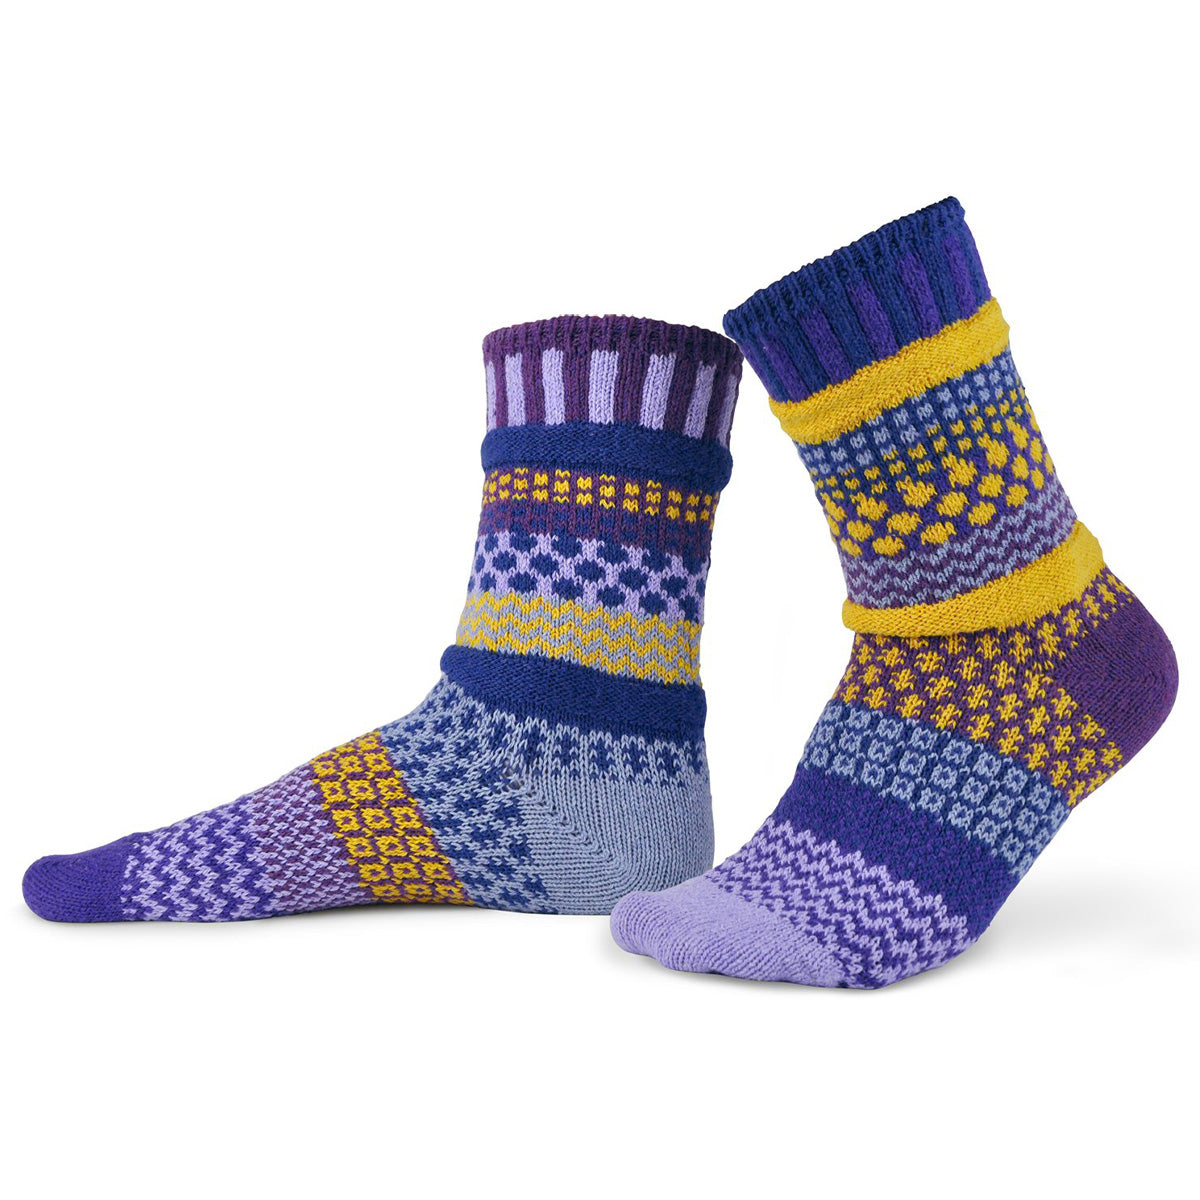 Purposefully mismatched socks feature wild patterns in dark and light purple and bright yellow!